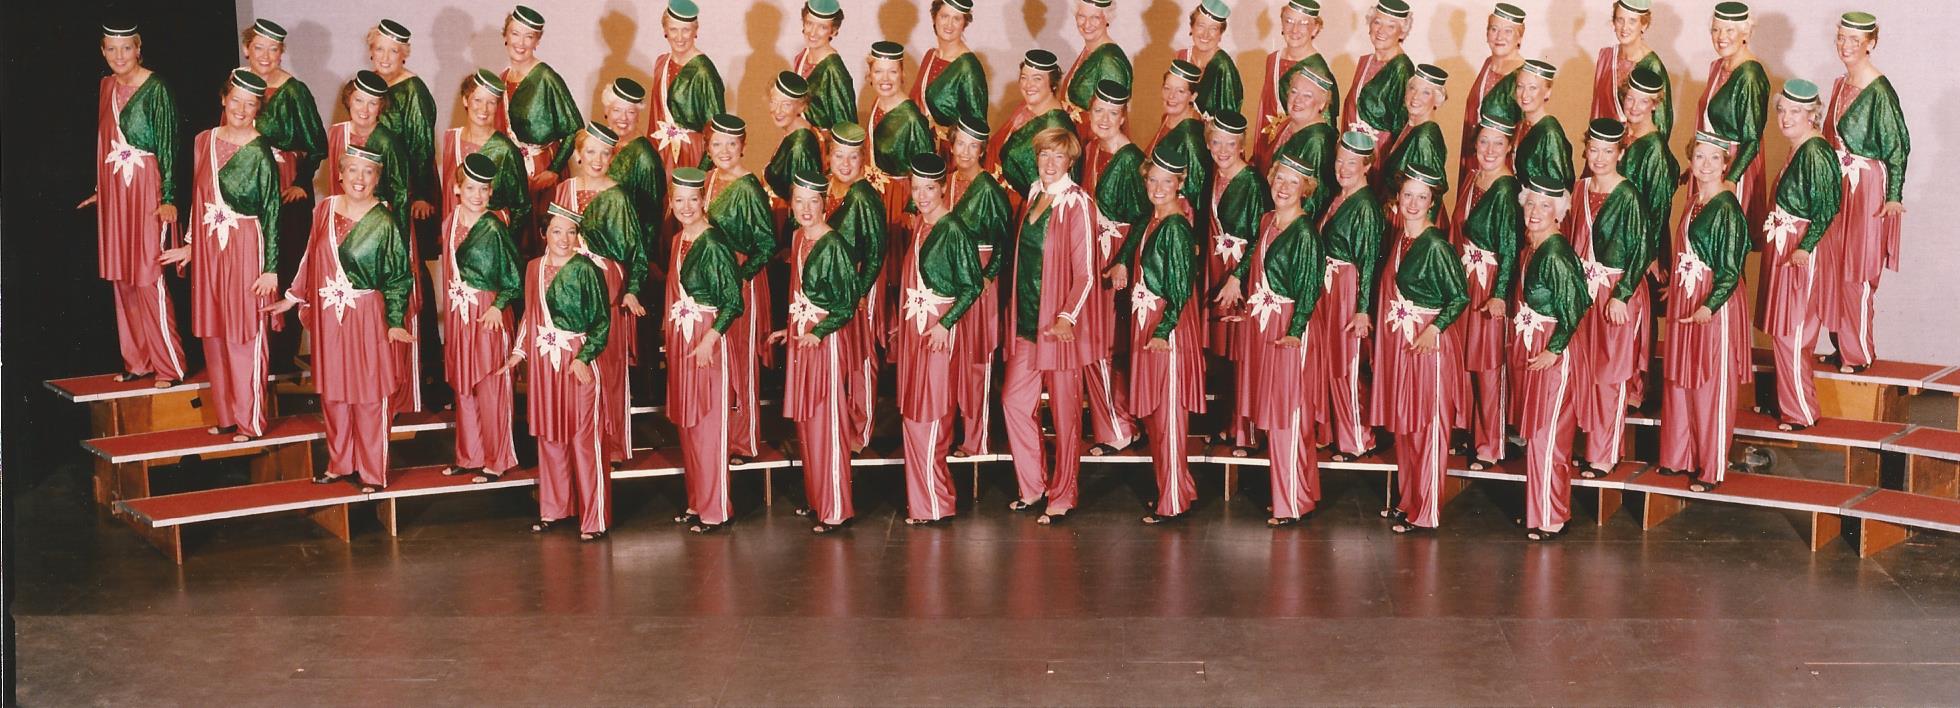 1992 The Chordettes